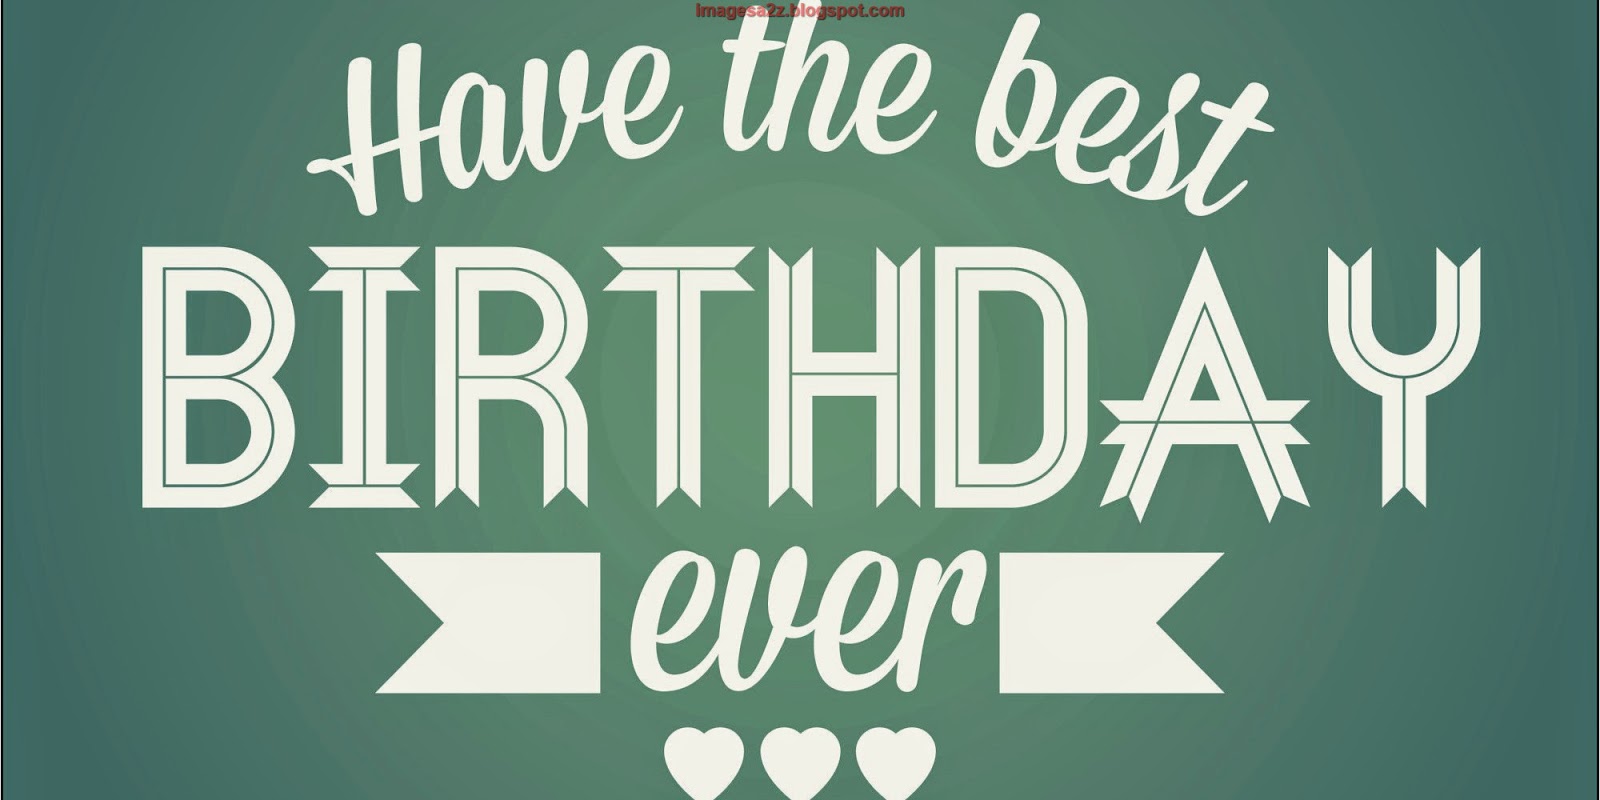 funny-18th-birthday-wishes-happy-birthday-wishes-quotes-cakes